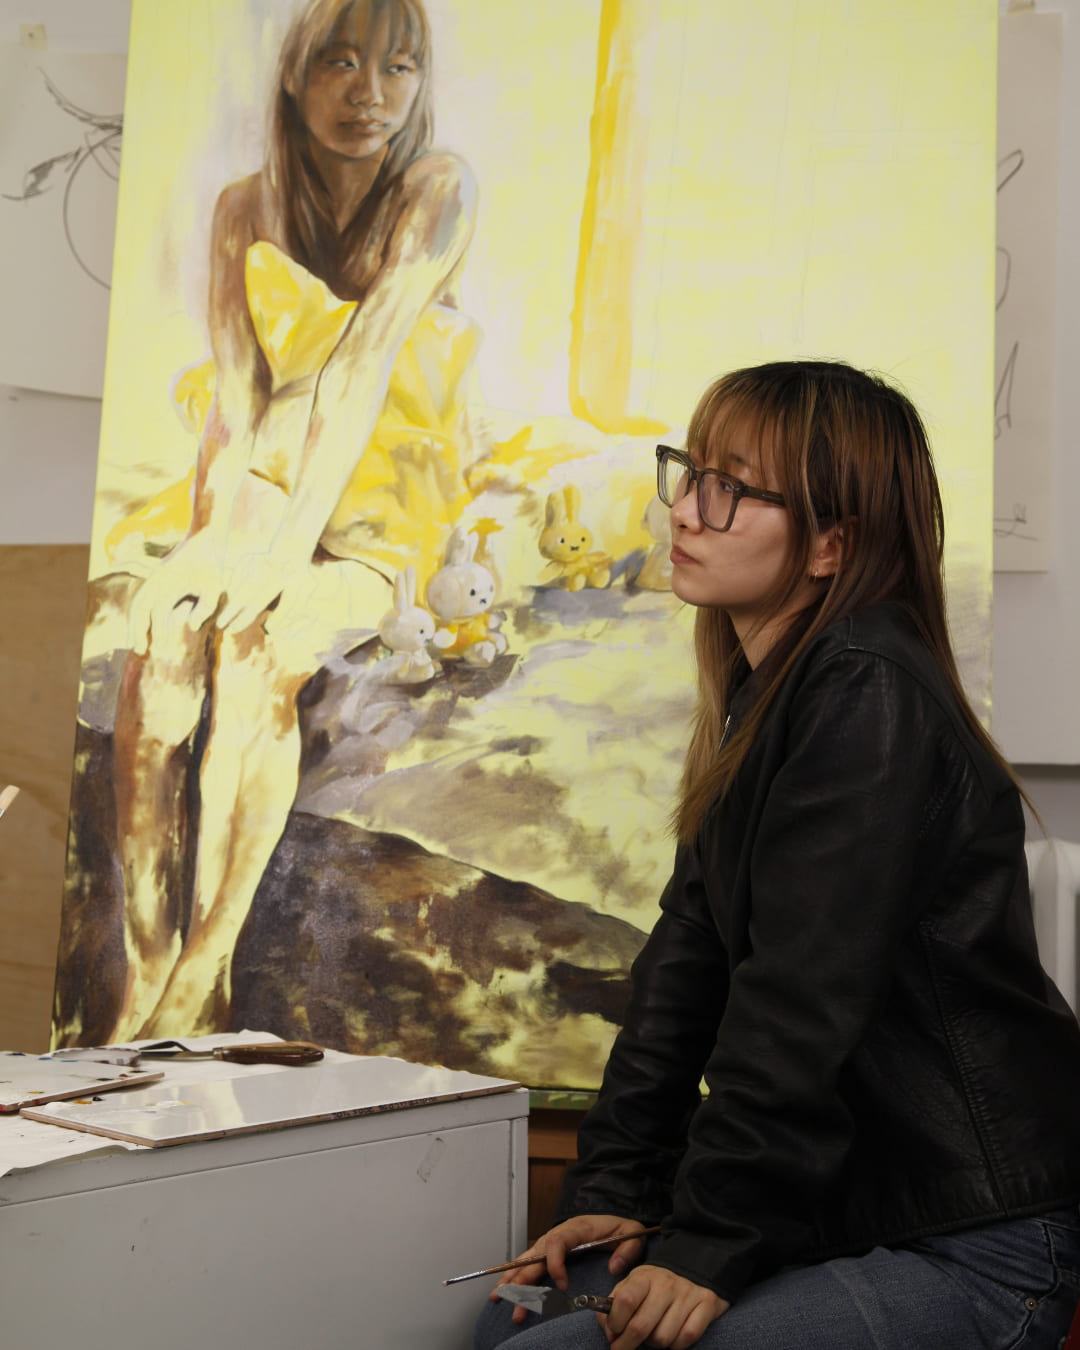 Photograph of the artist sitting next to her painting.